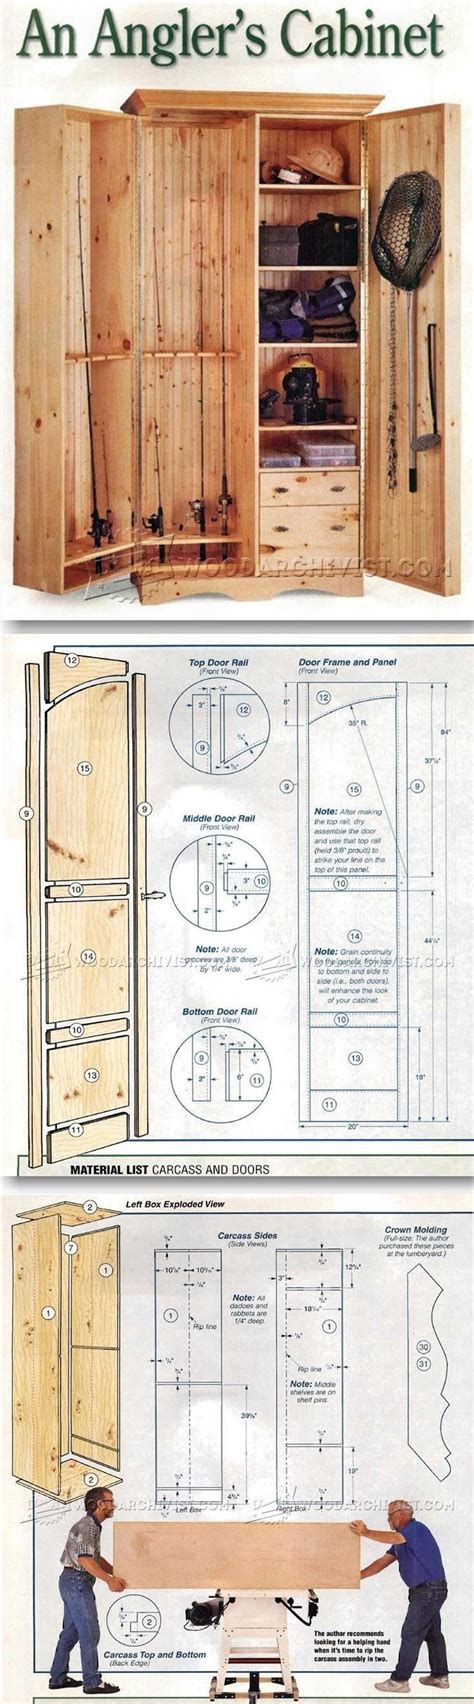 Fishing Rod Cabinet Plans Furniture Plans And Projects